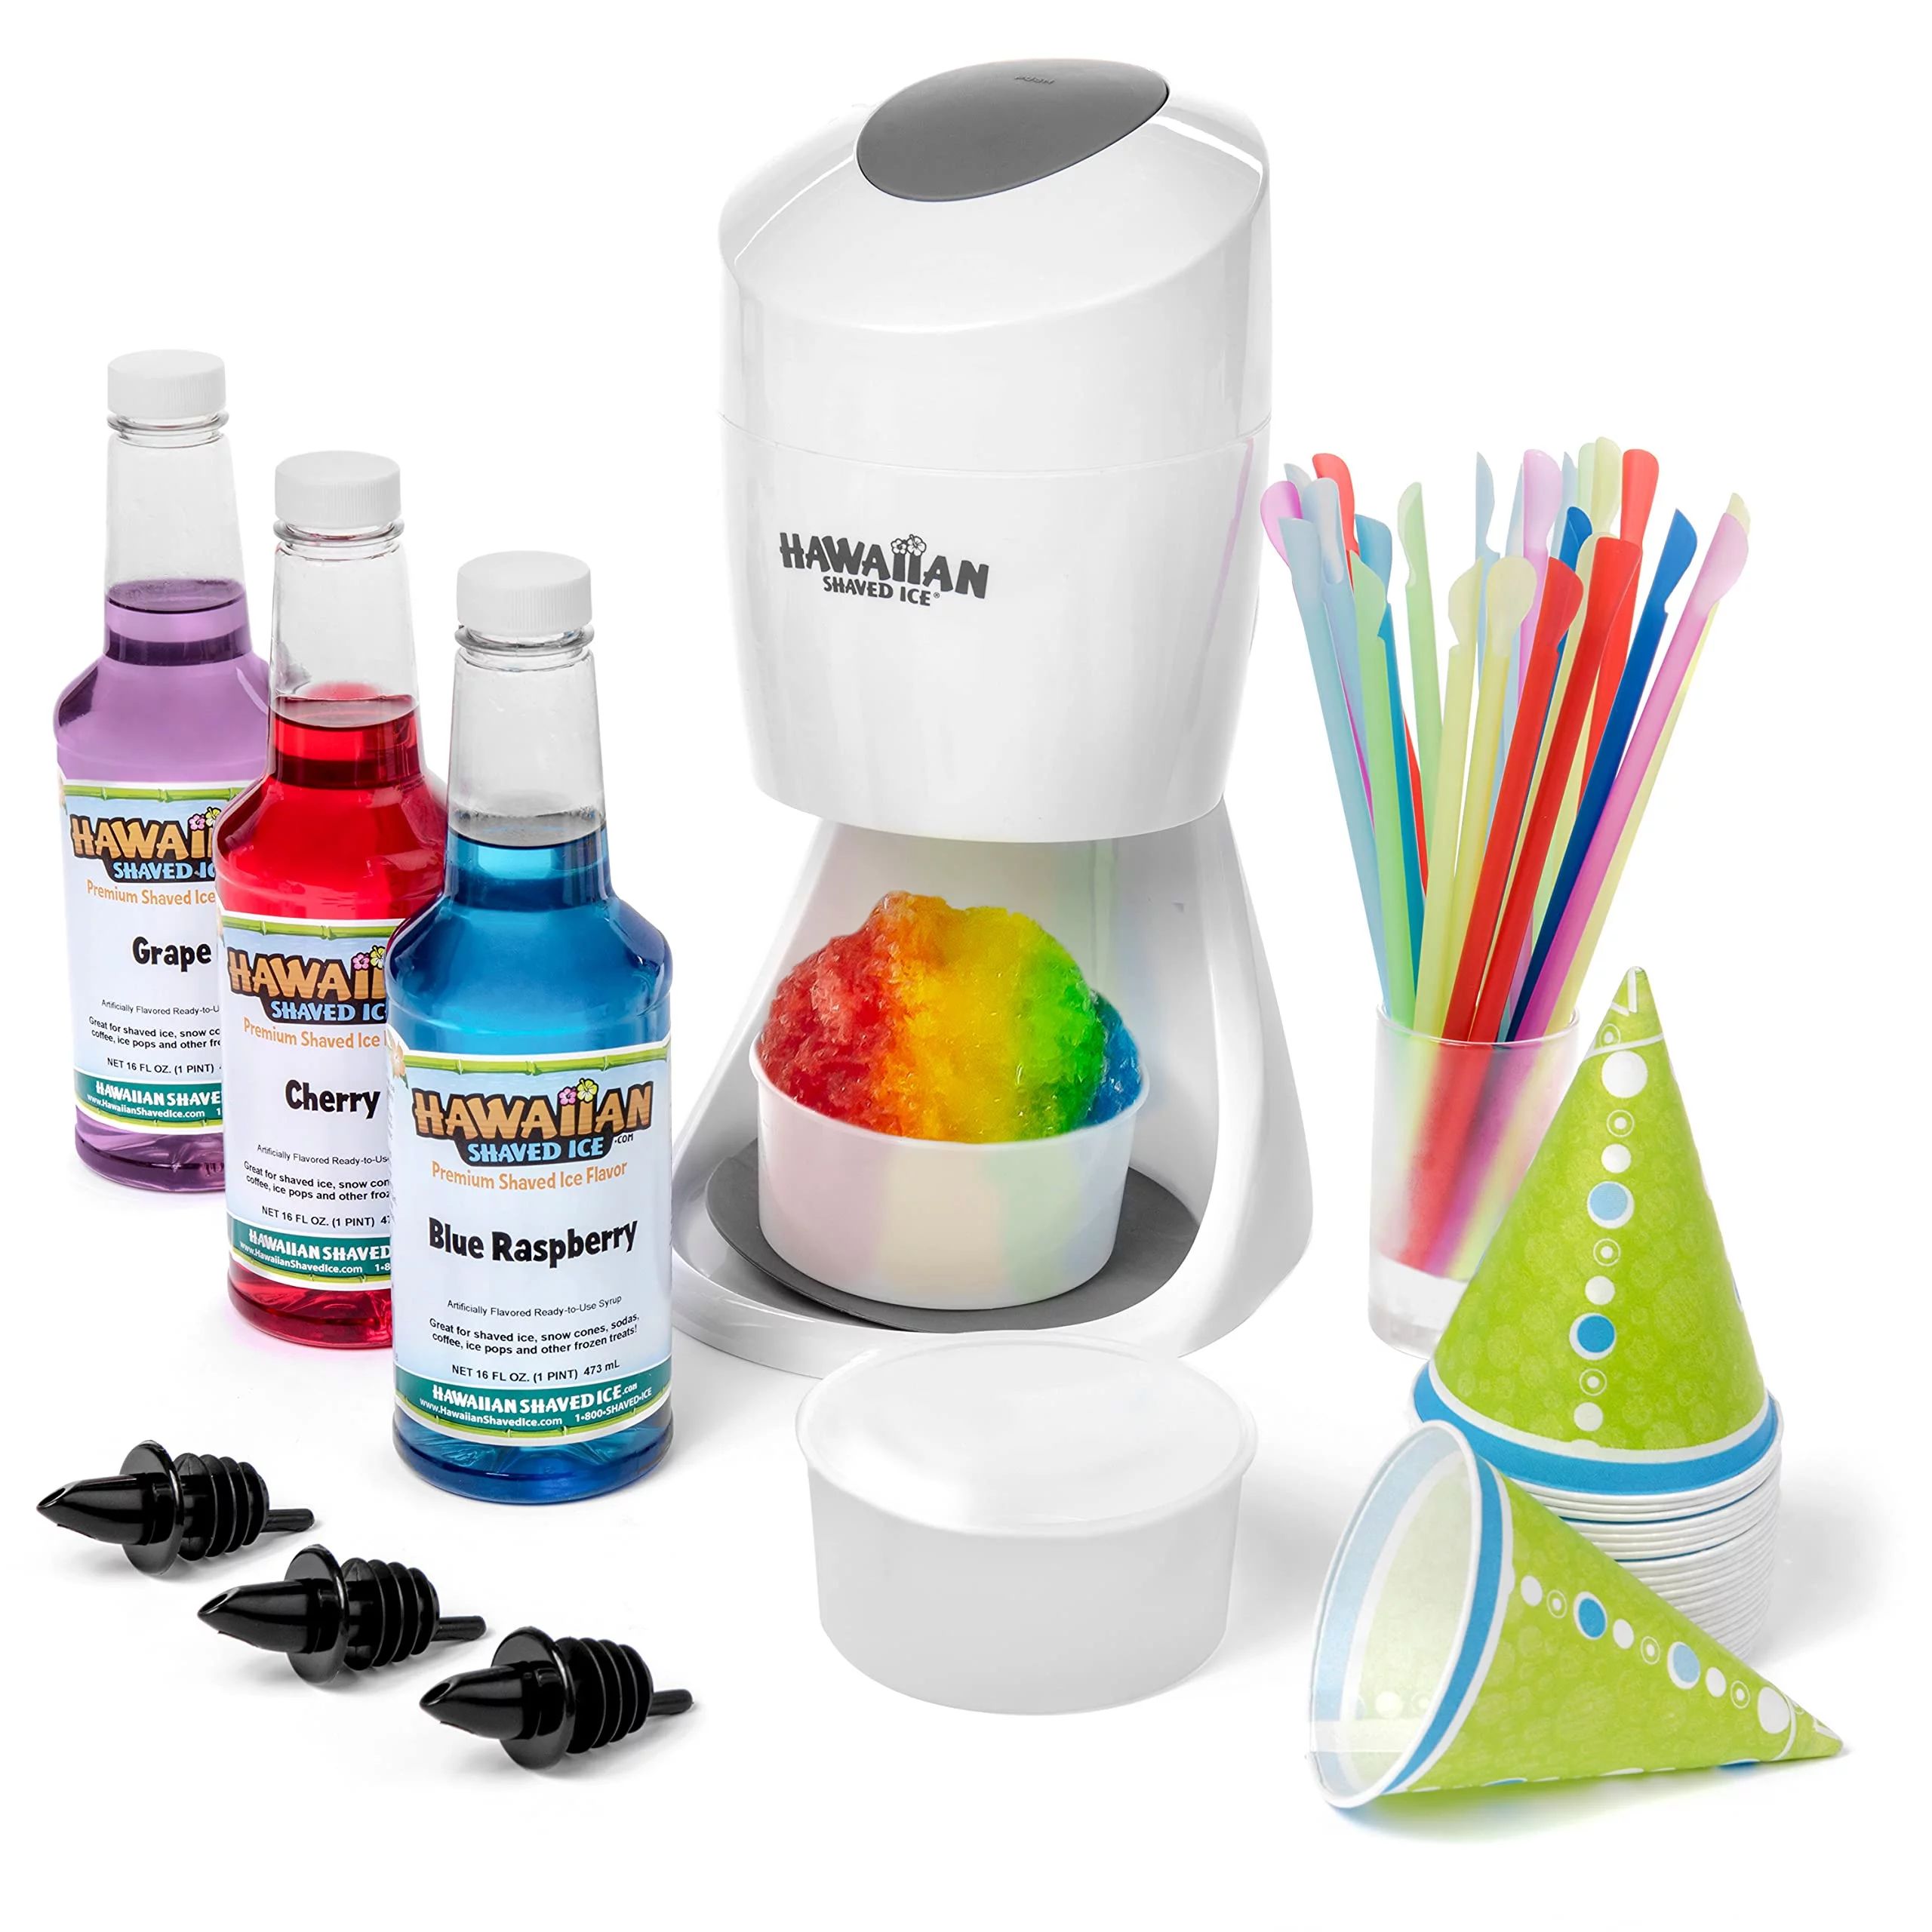 Hawaiian Shaved Ice Shaved Ice White S900A Machine Party Package with 3 Syrups and Supplies | Walmart (US)